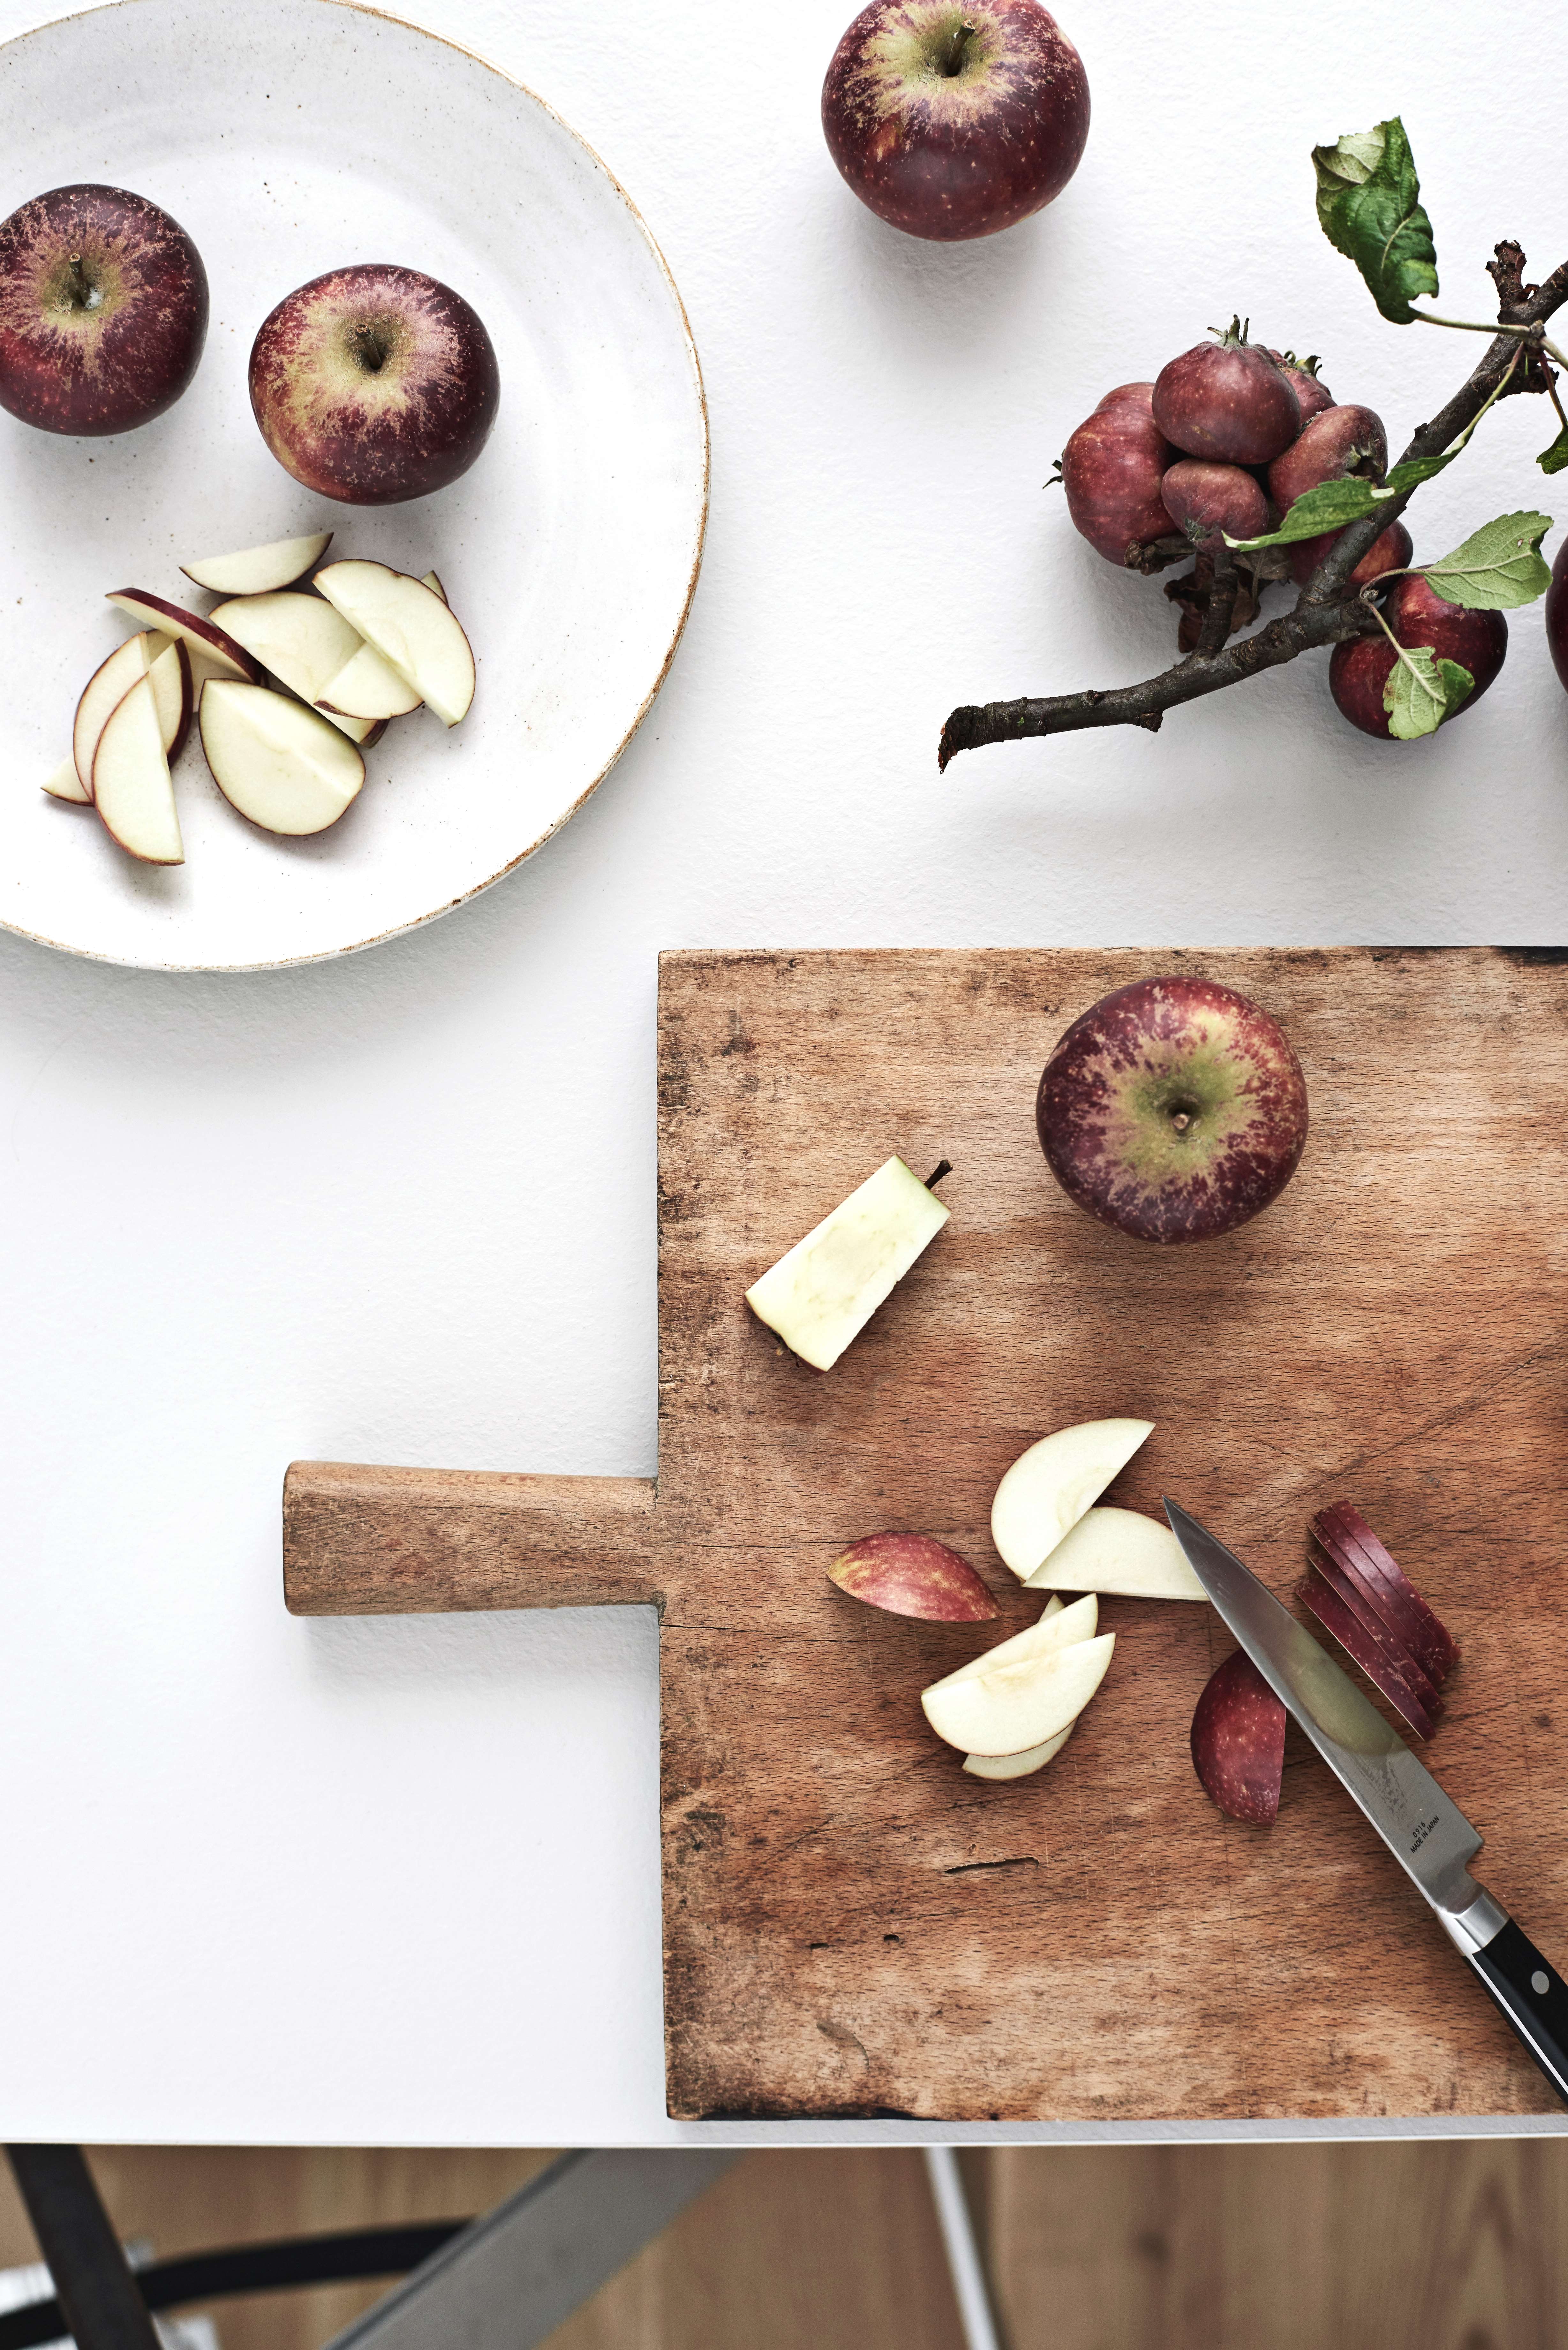 White worktop and a chop board with apples